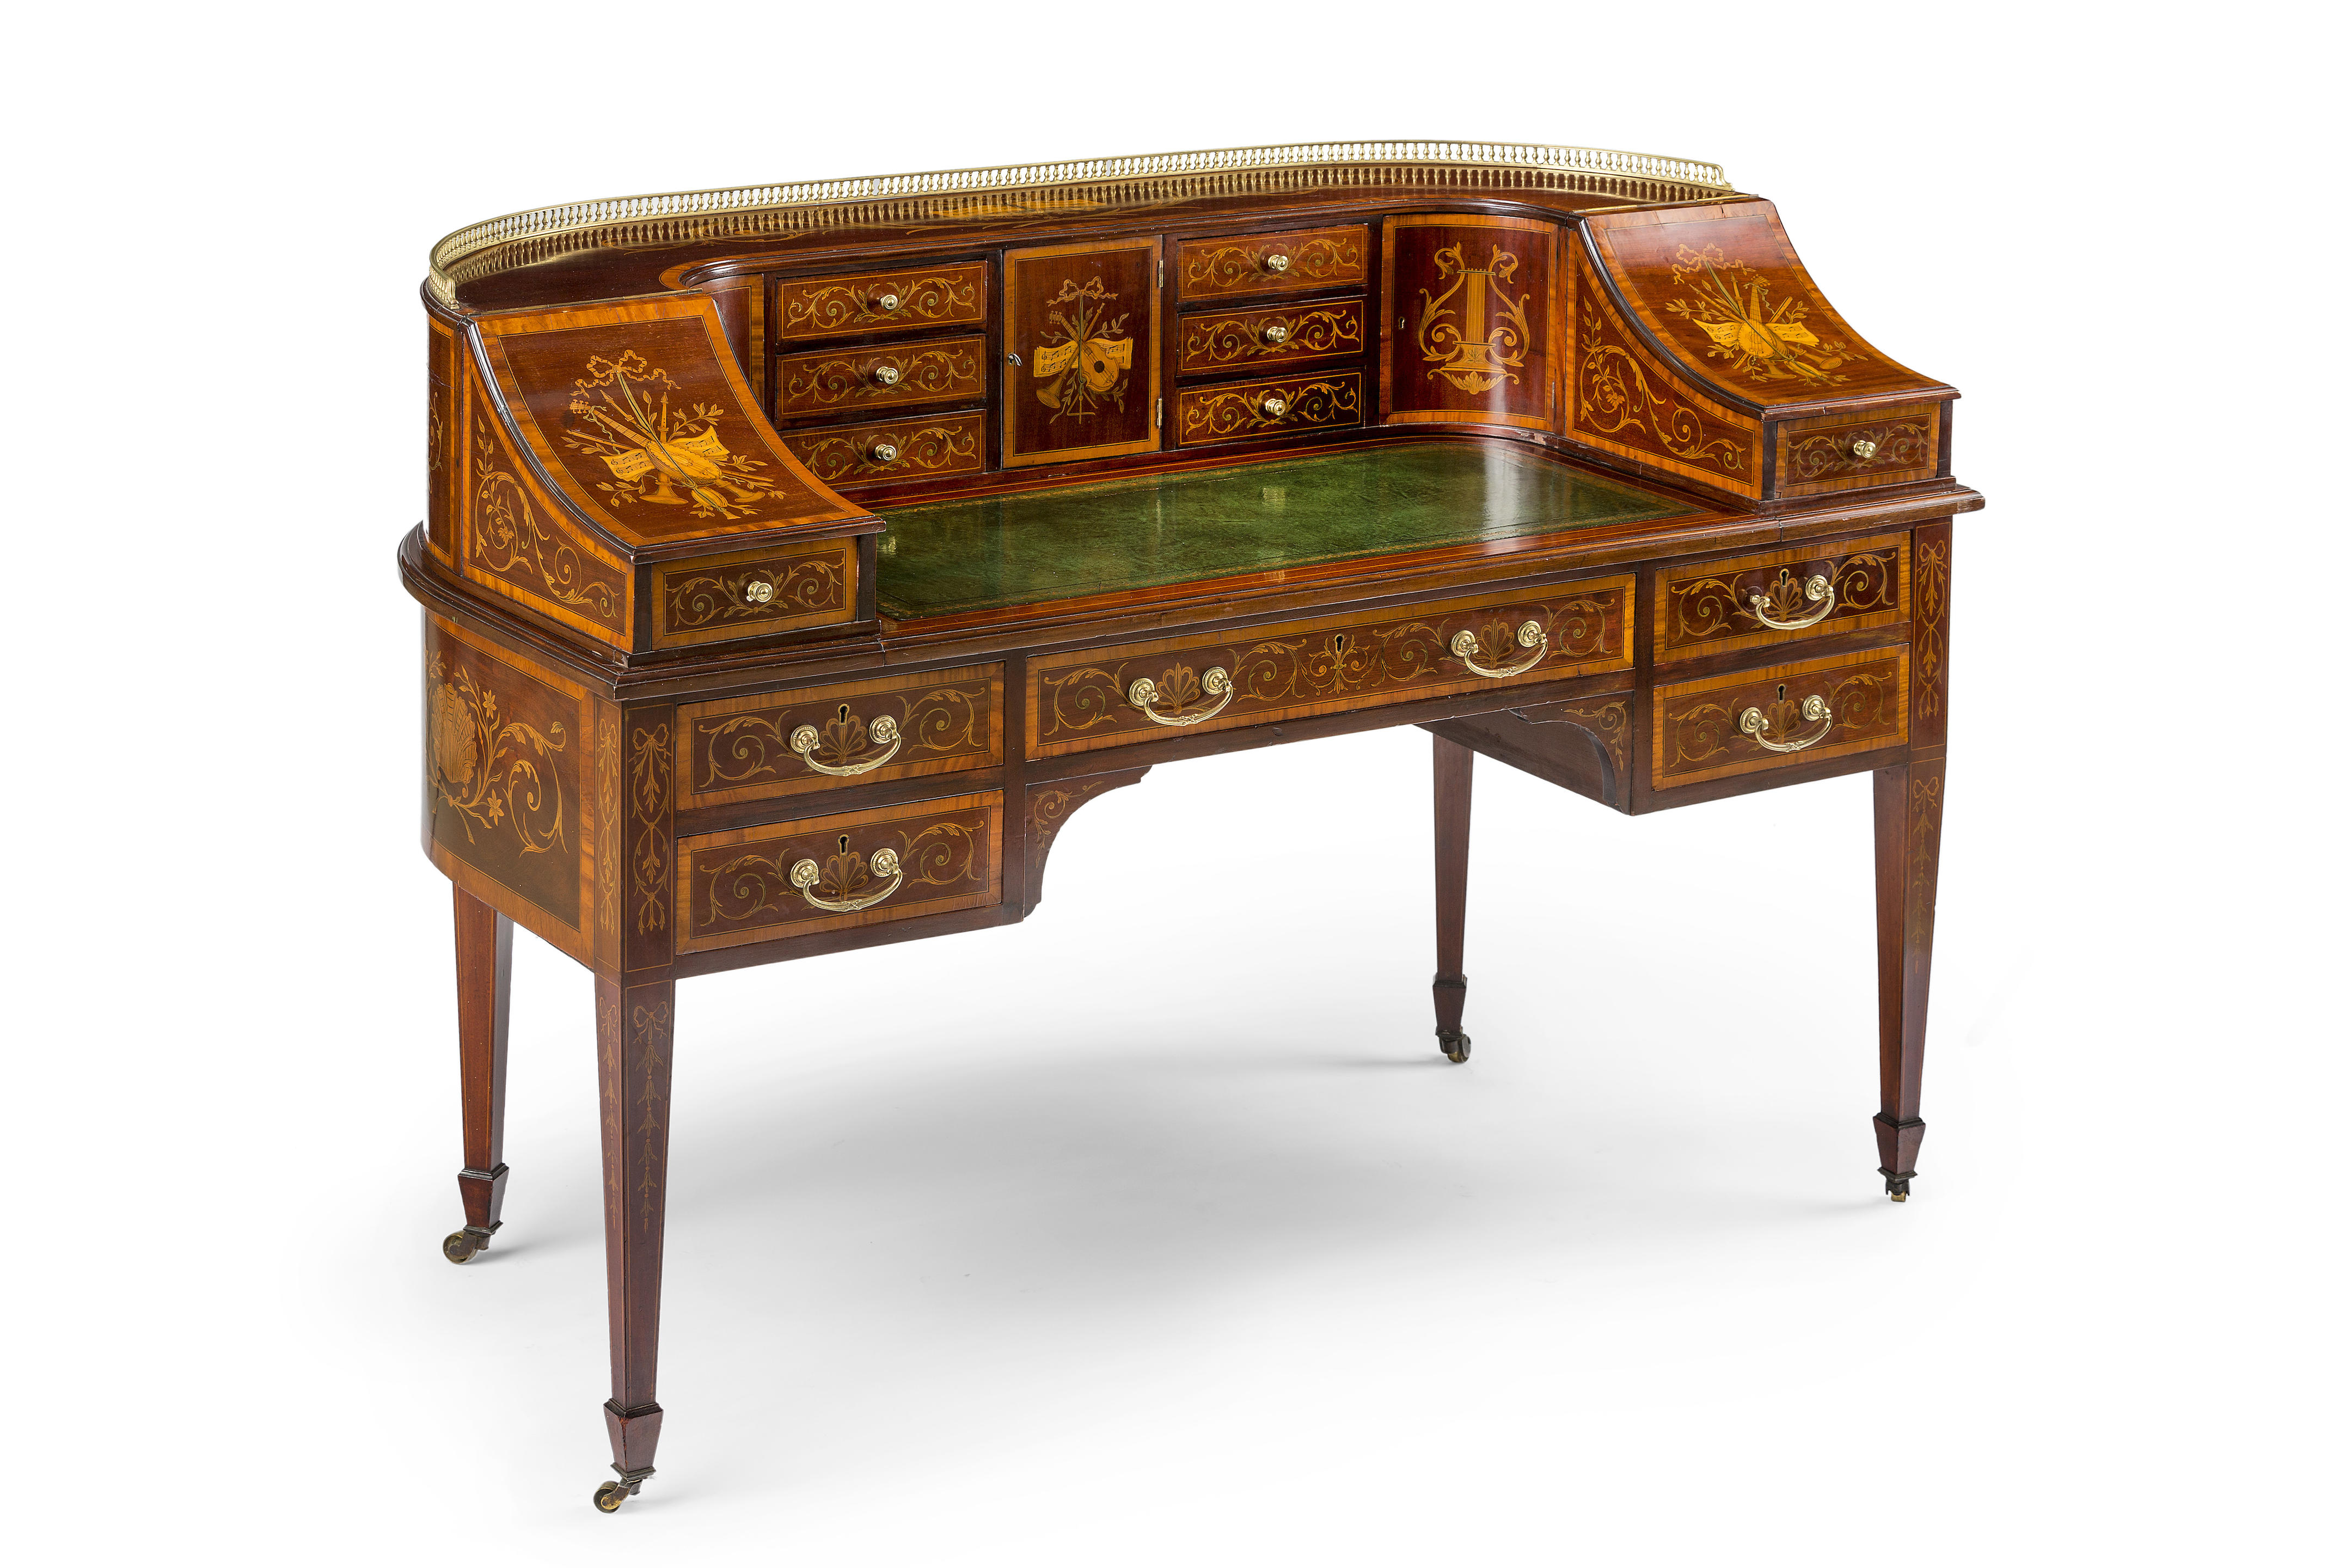 A fine Victorian inlaid mahogany and satinwood Carlton House desk